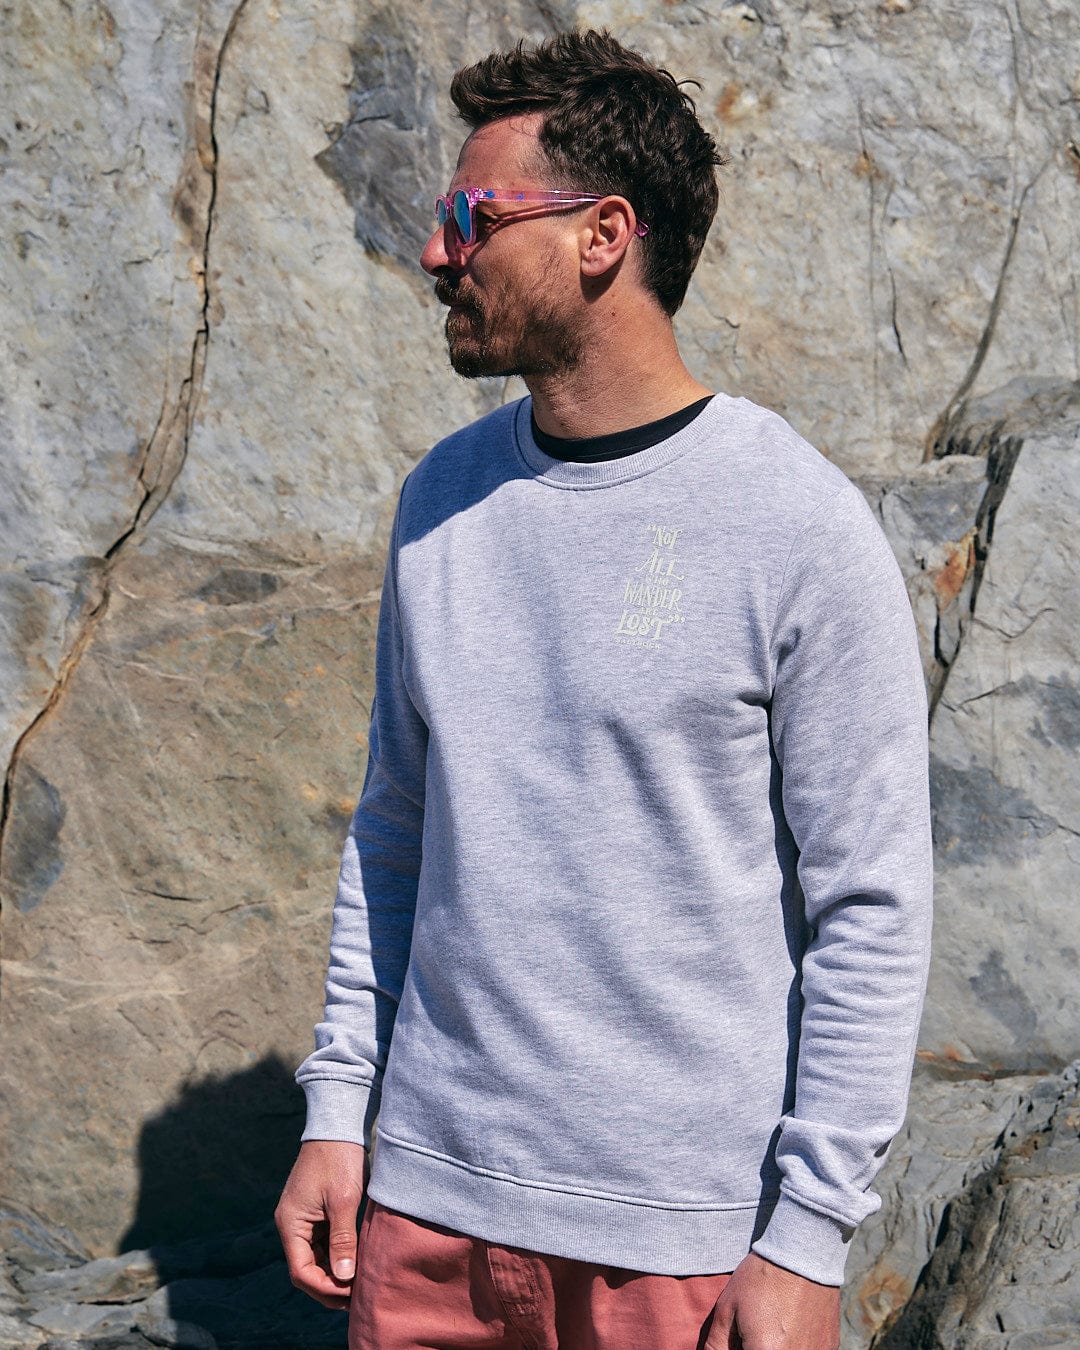 A man wearing a Saltrock Lost Ships - Mens Crew Sweat - Grey sweatshirt and pink shorts standing next to rocks.